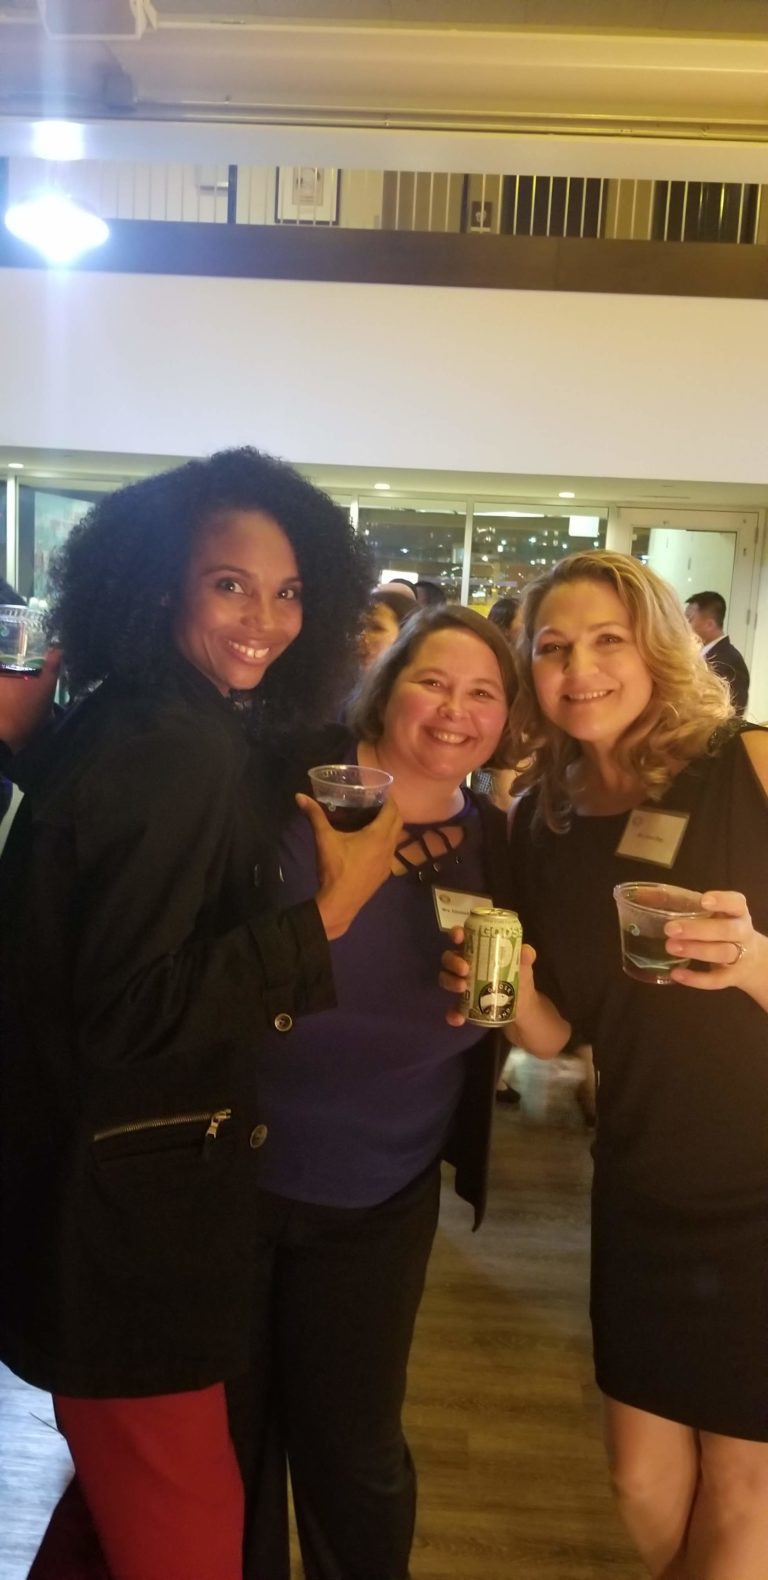 Three women are holding drinks at a party.